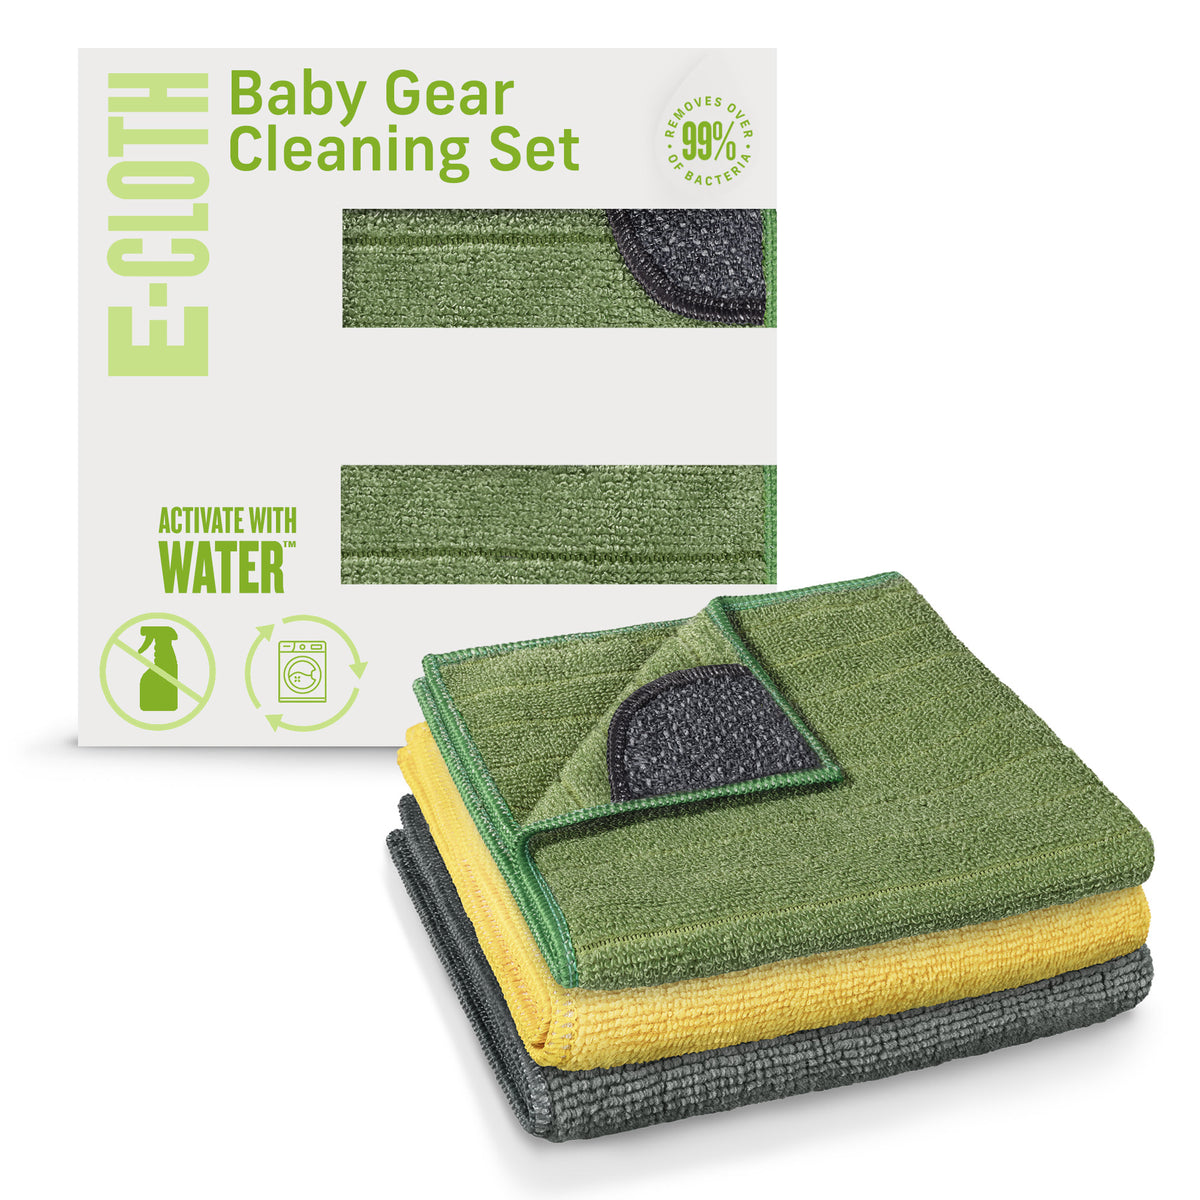 Baby Gear Cleaning Kit